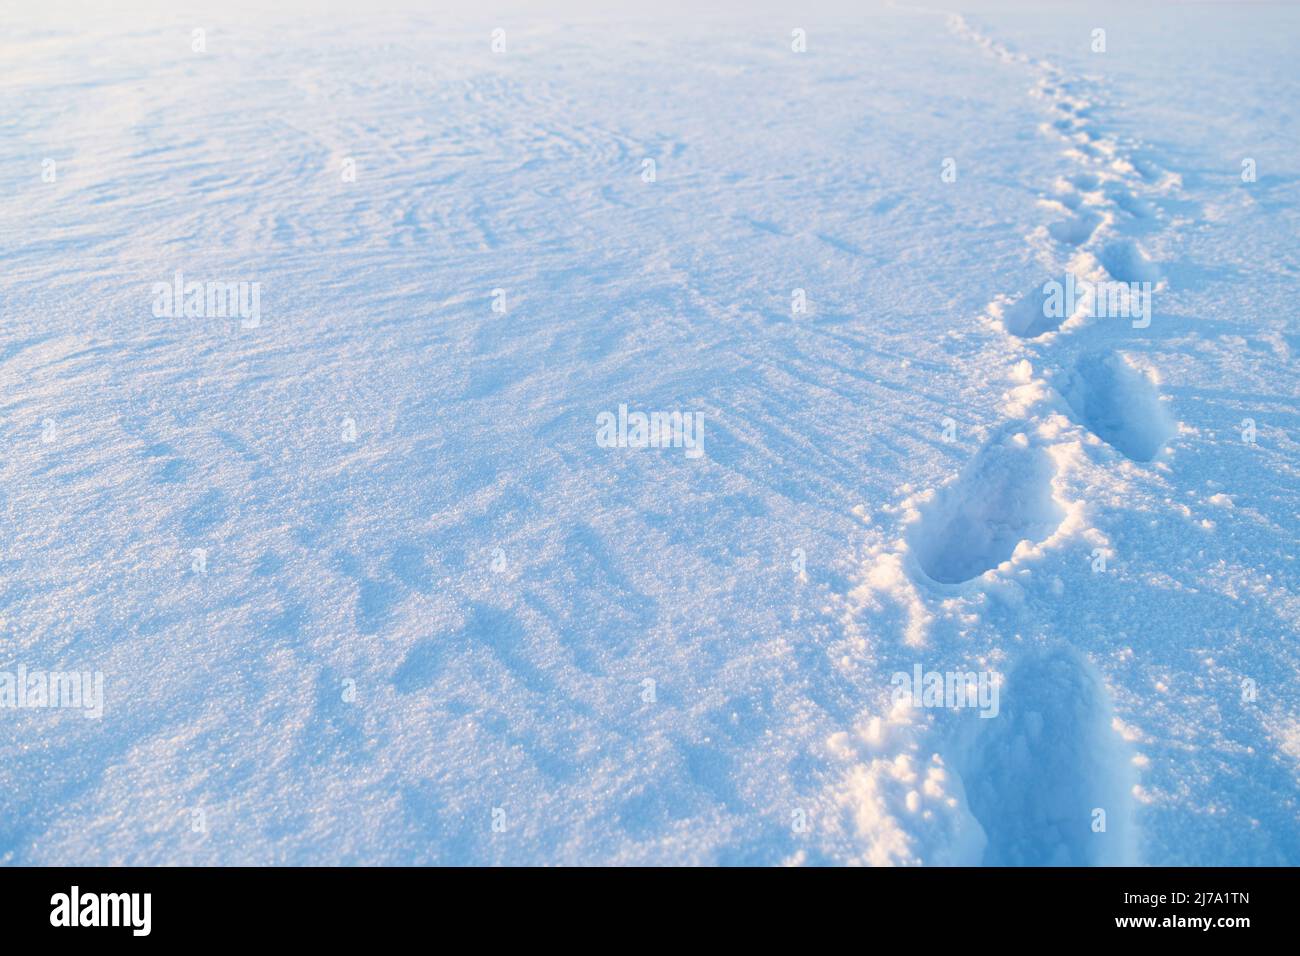 Footsteps on snow. View of footsteps on a frozen and snowy lake in Finland on a sunny day in the winter. Copy space. Focus on the foreground. Stock Photo